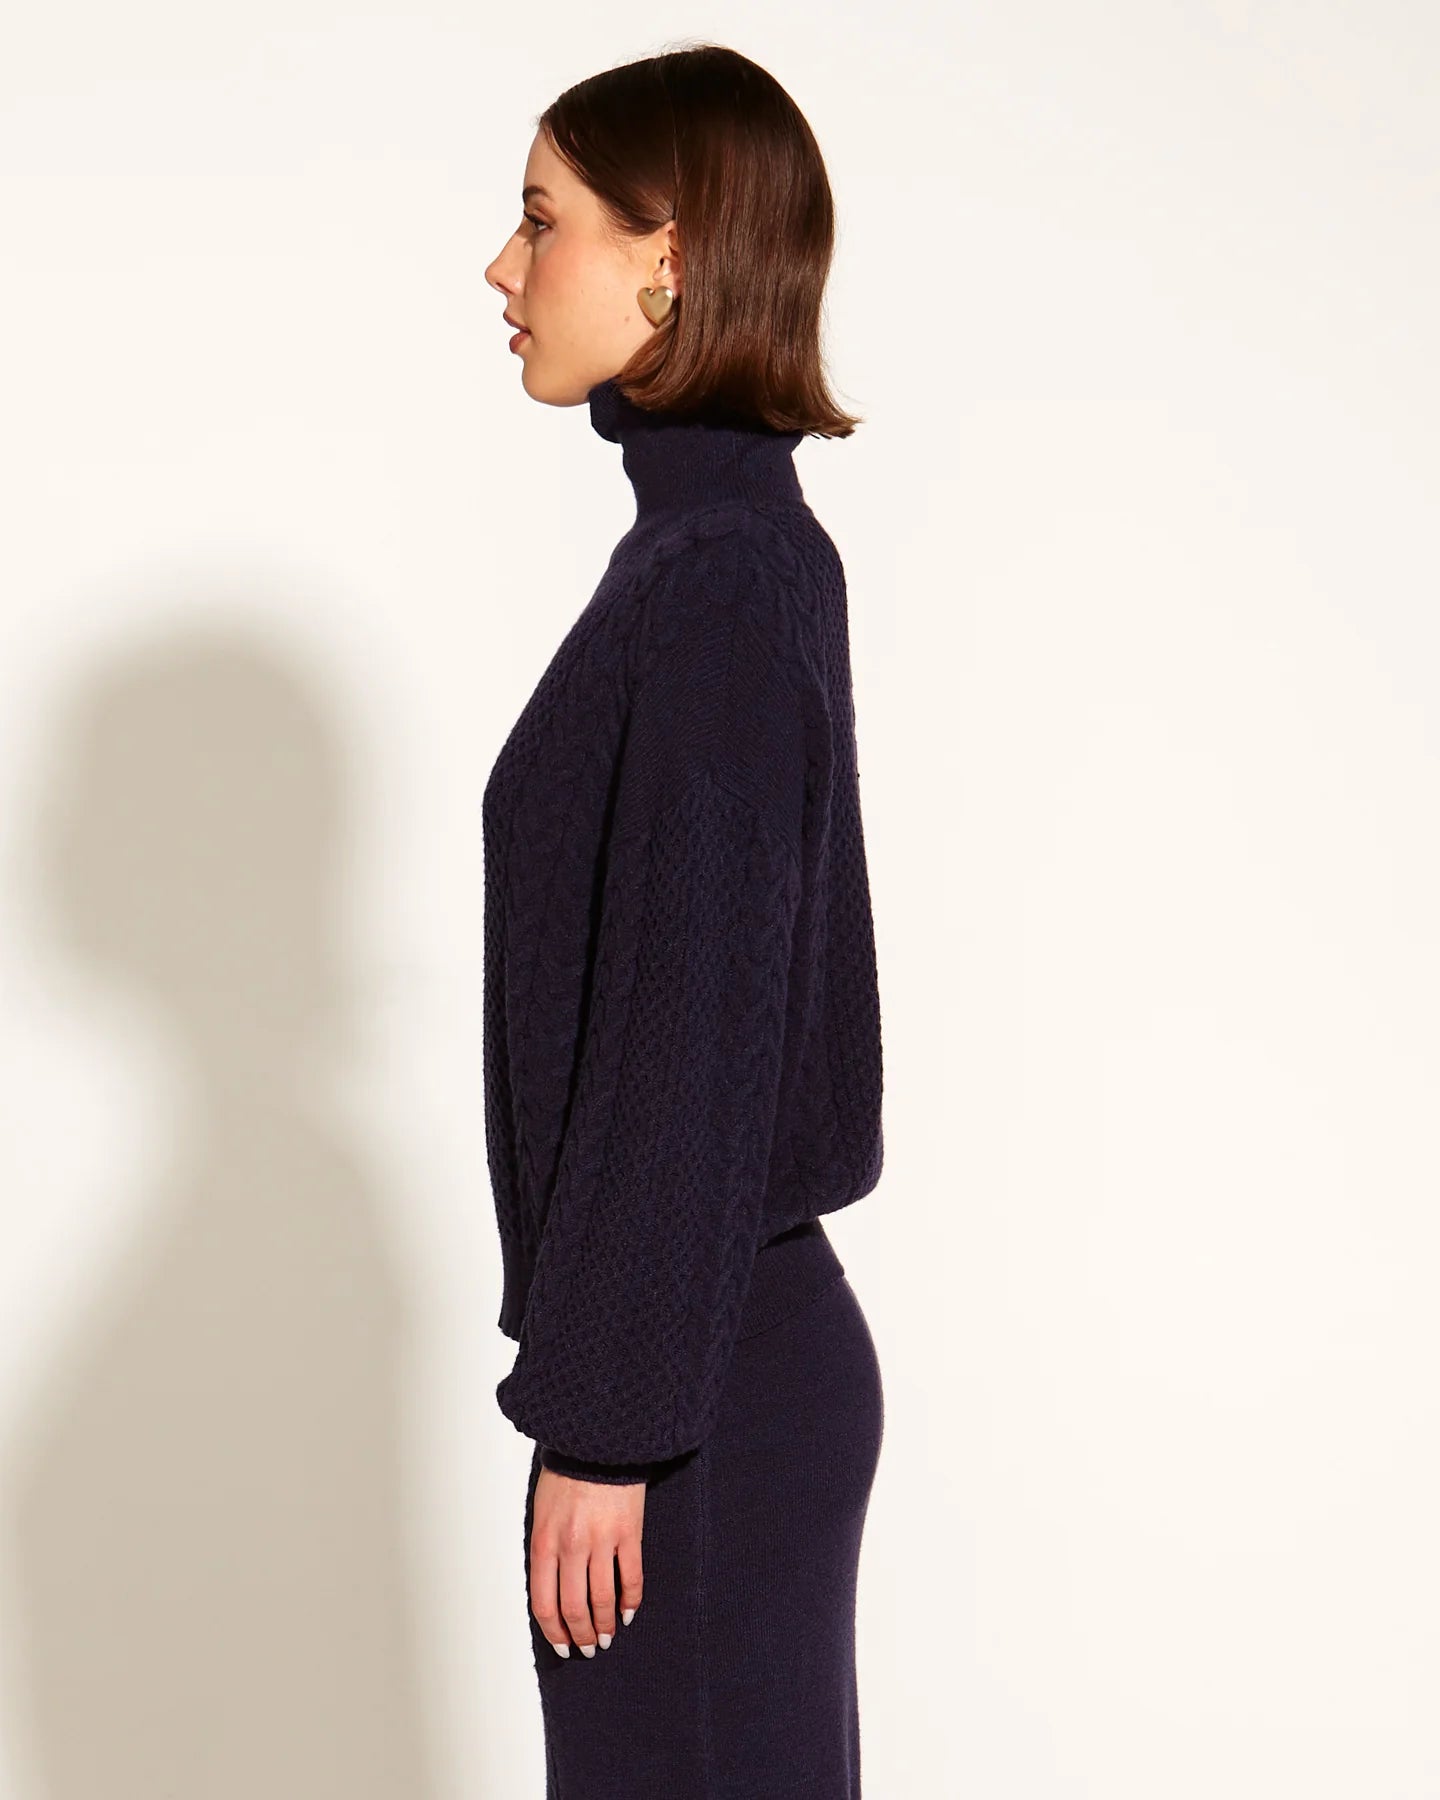 FATE+BECKER TREASURE TURTLENECK CABLE KNIT NAVY